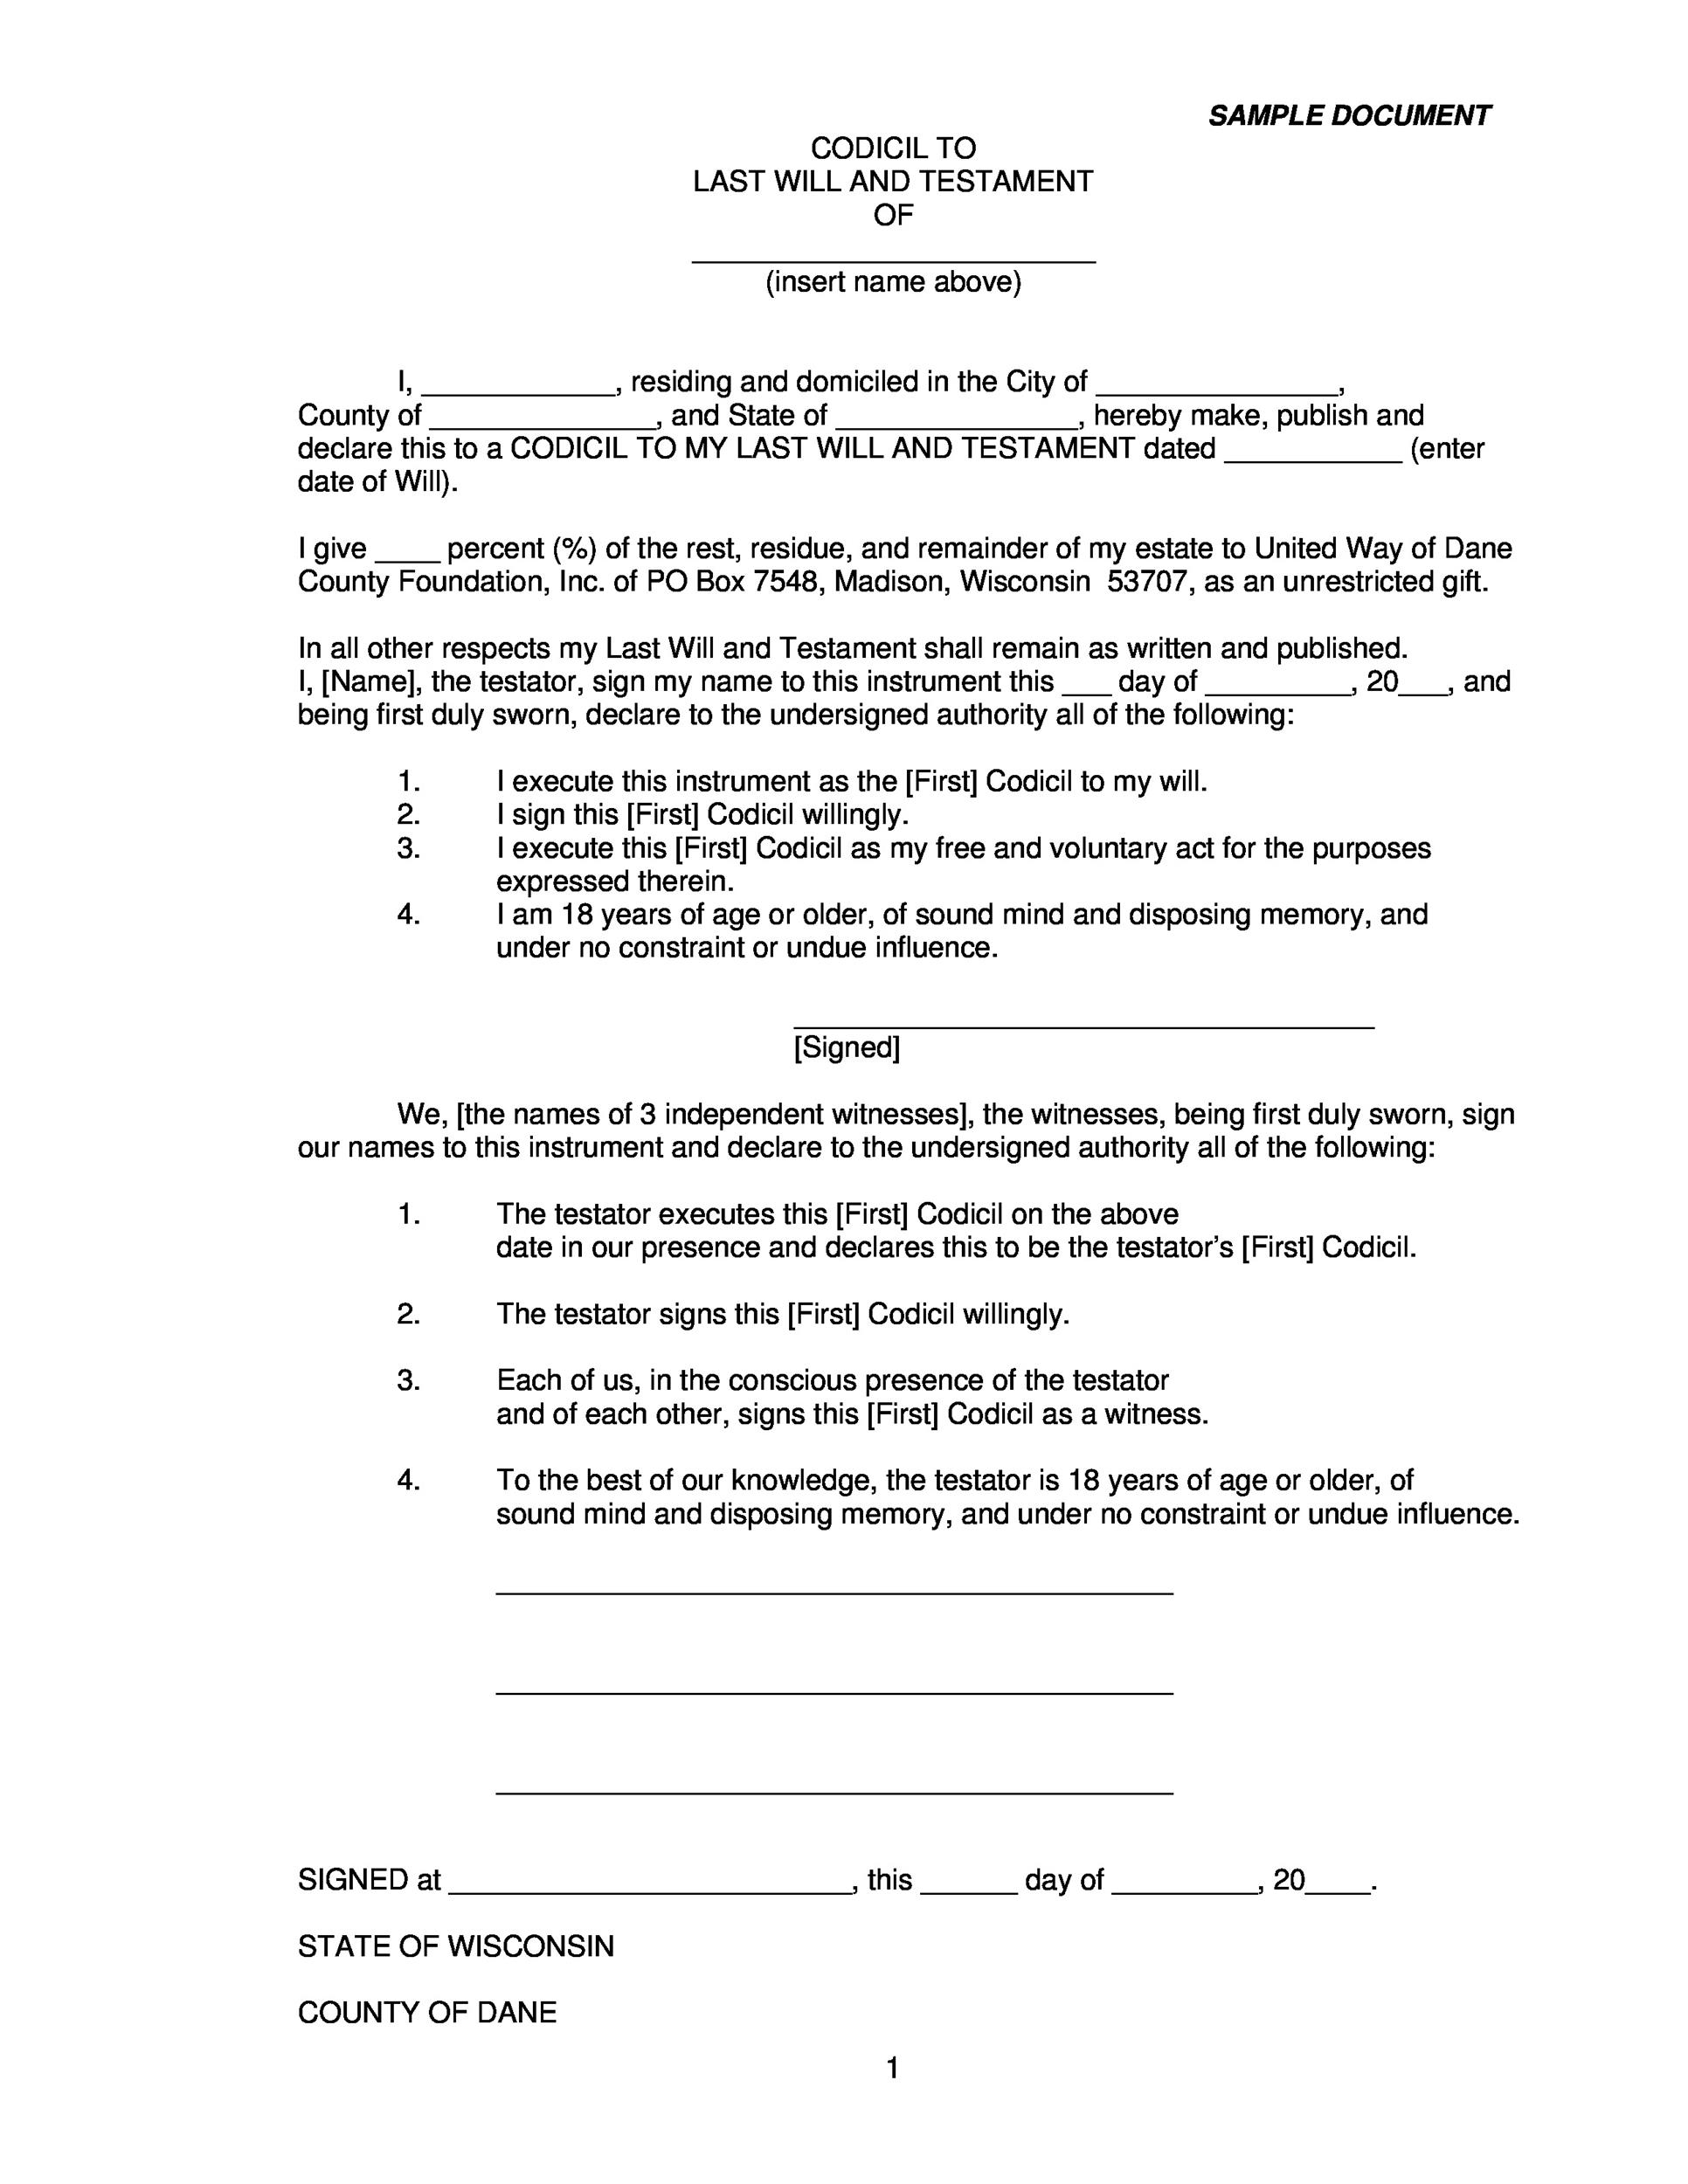 free-printable-last-will-and-testament-nj-tutore-org-master-of-documents